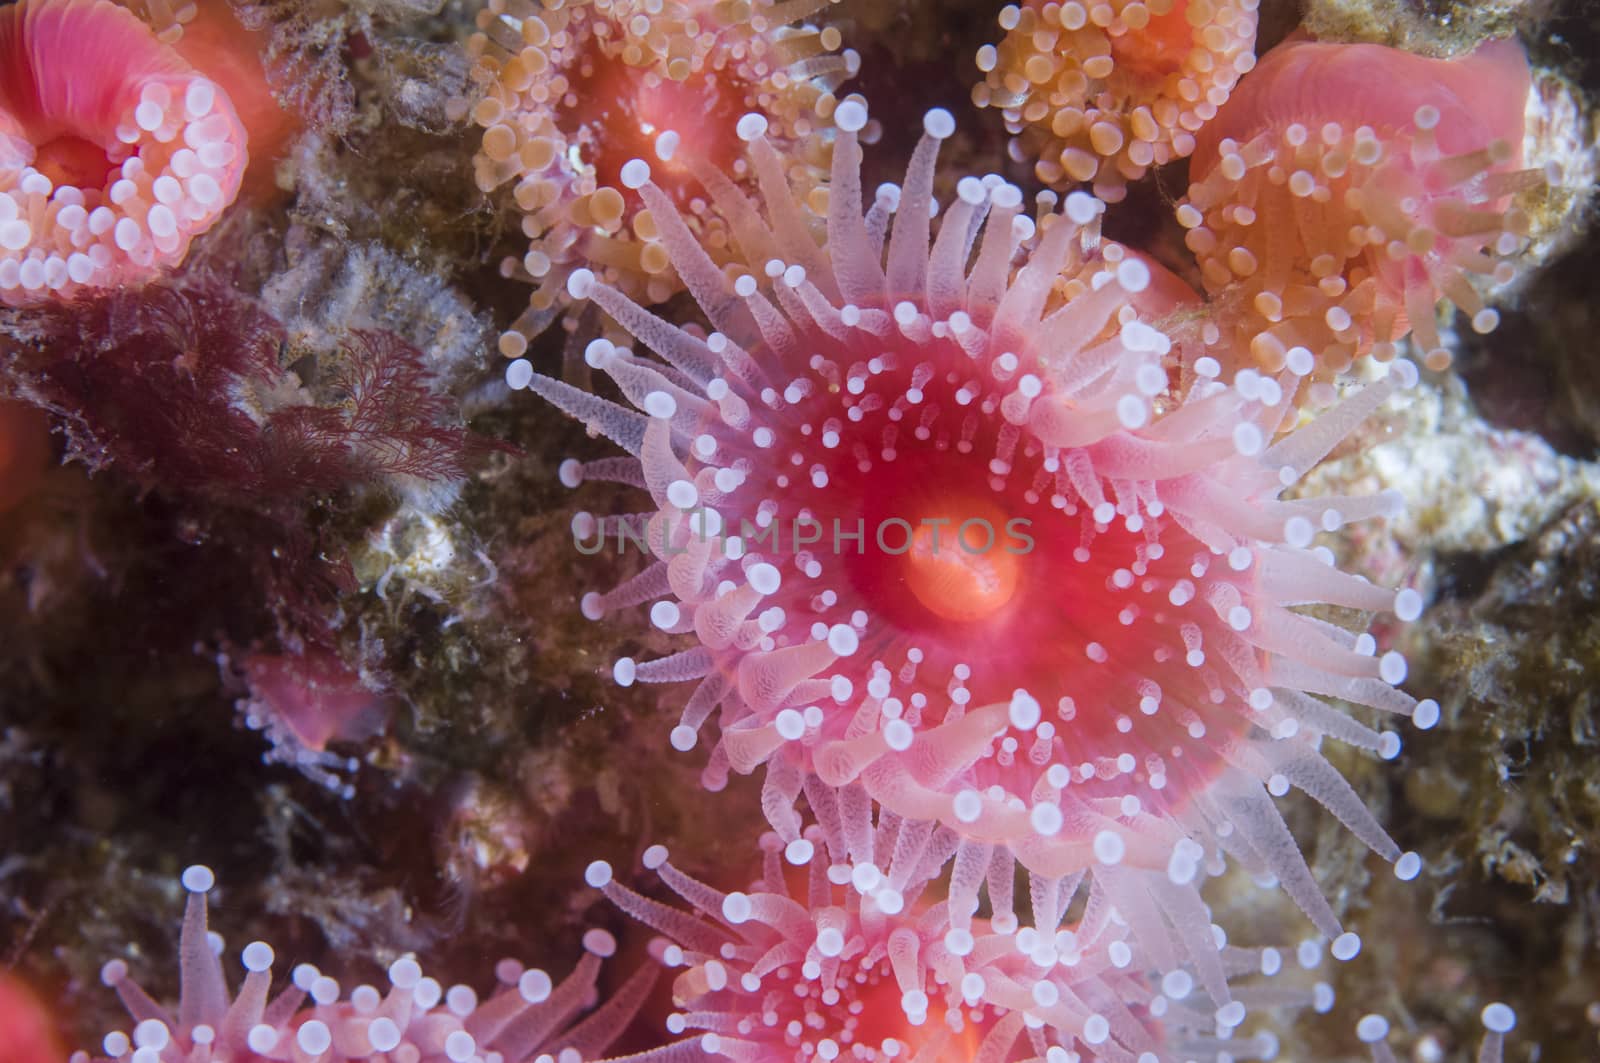 Cup coral off Anacapa Island, California by Njean